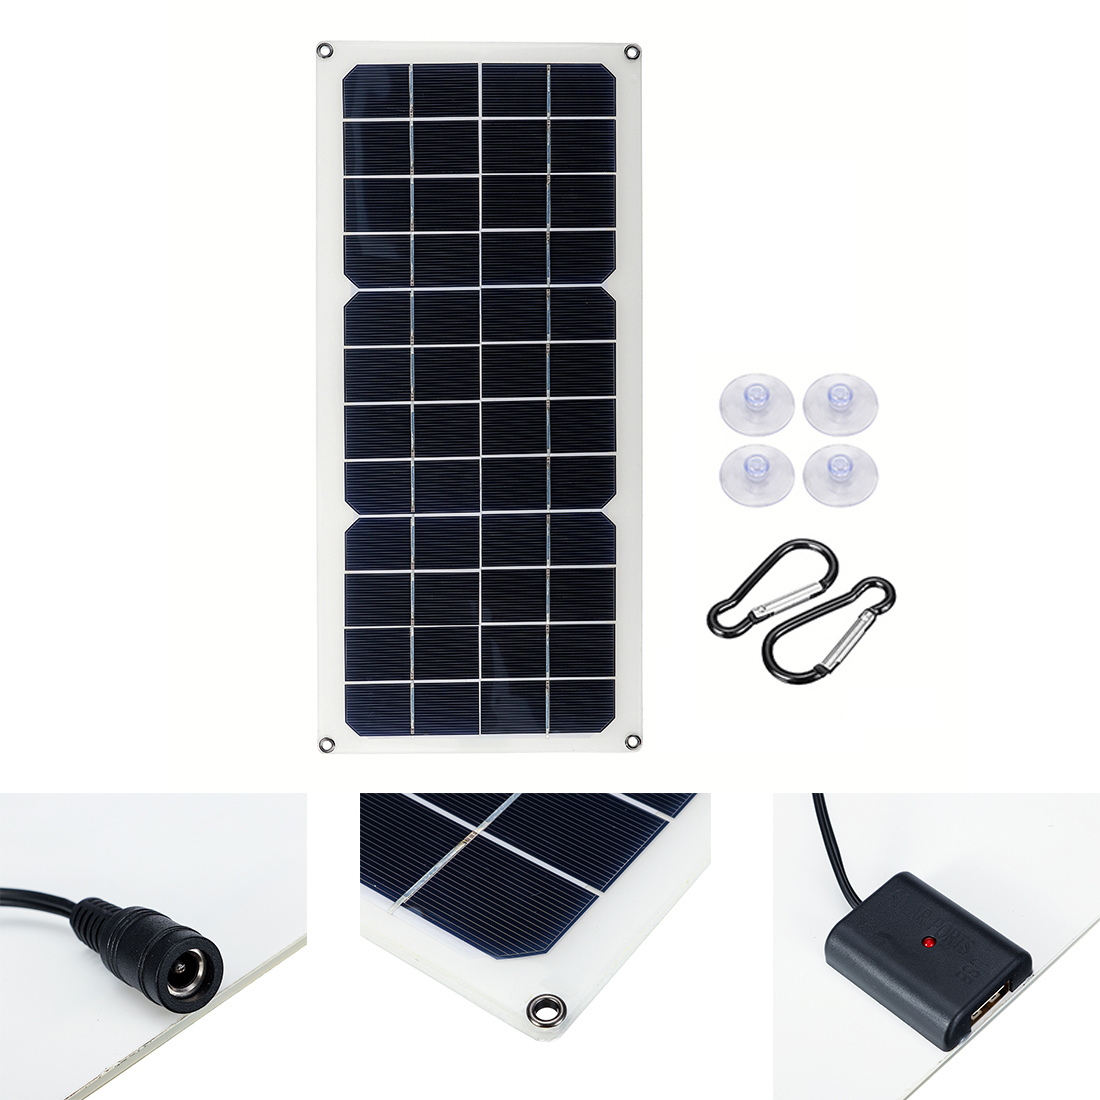 

10W 16V 0.9A Monocrystalline Silicon Semi-flexible Solar Panel with Single USB Charger + DC Junction Box + 4 x Suction Cup + 2 x Carabiner